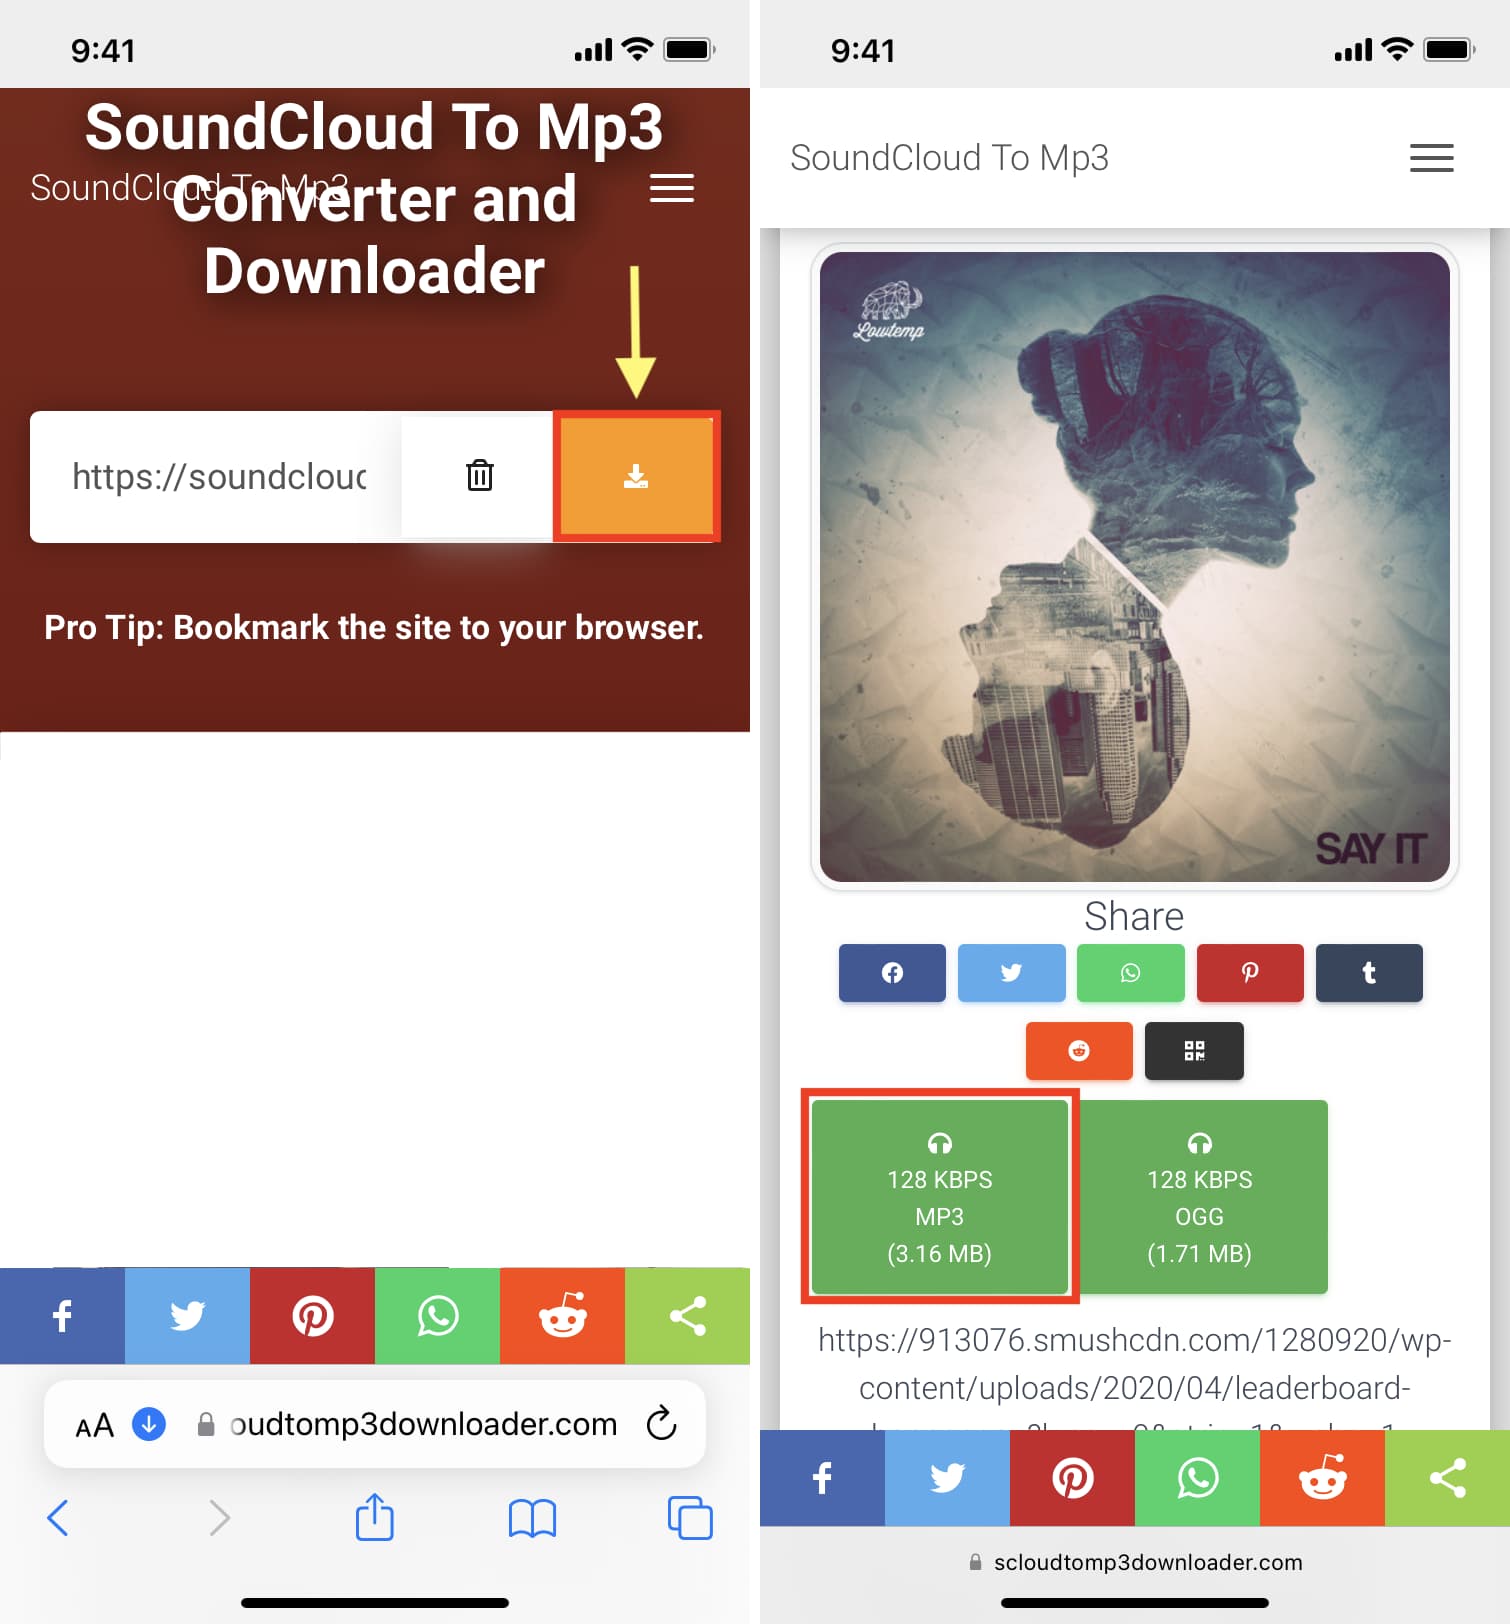 Download SoundCloud Mp3 file on iPhone